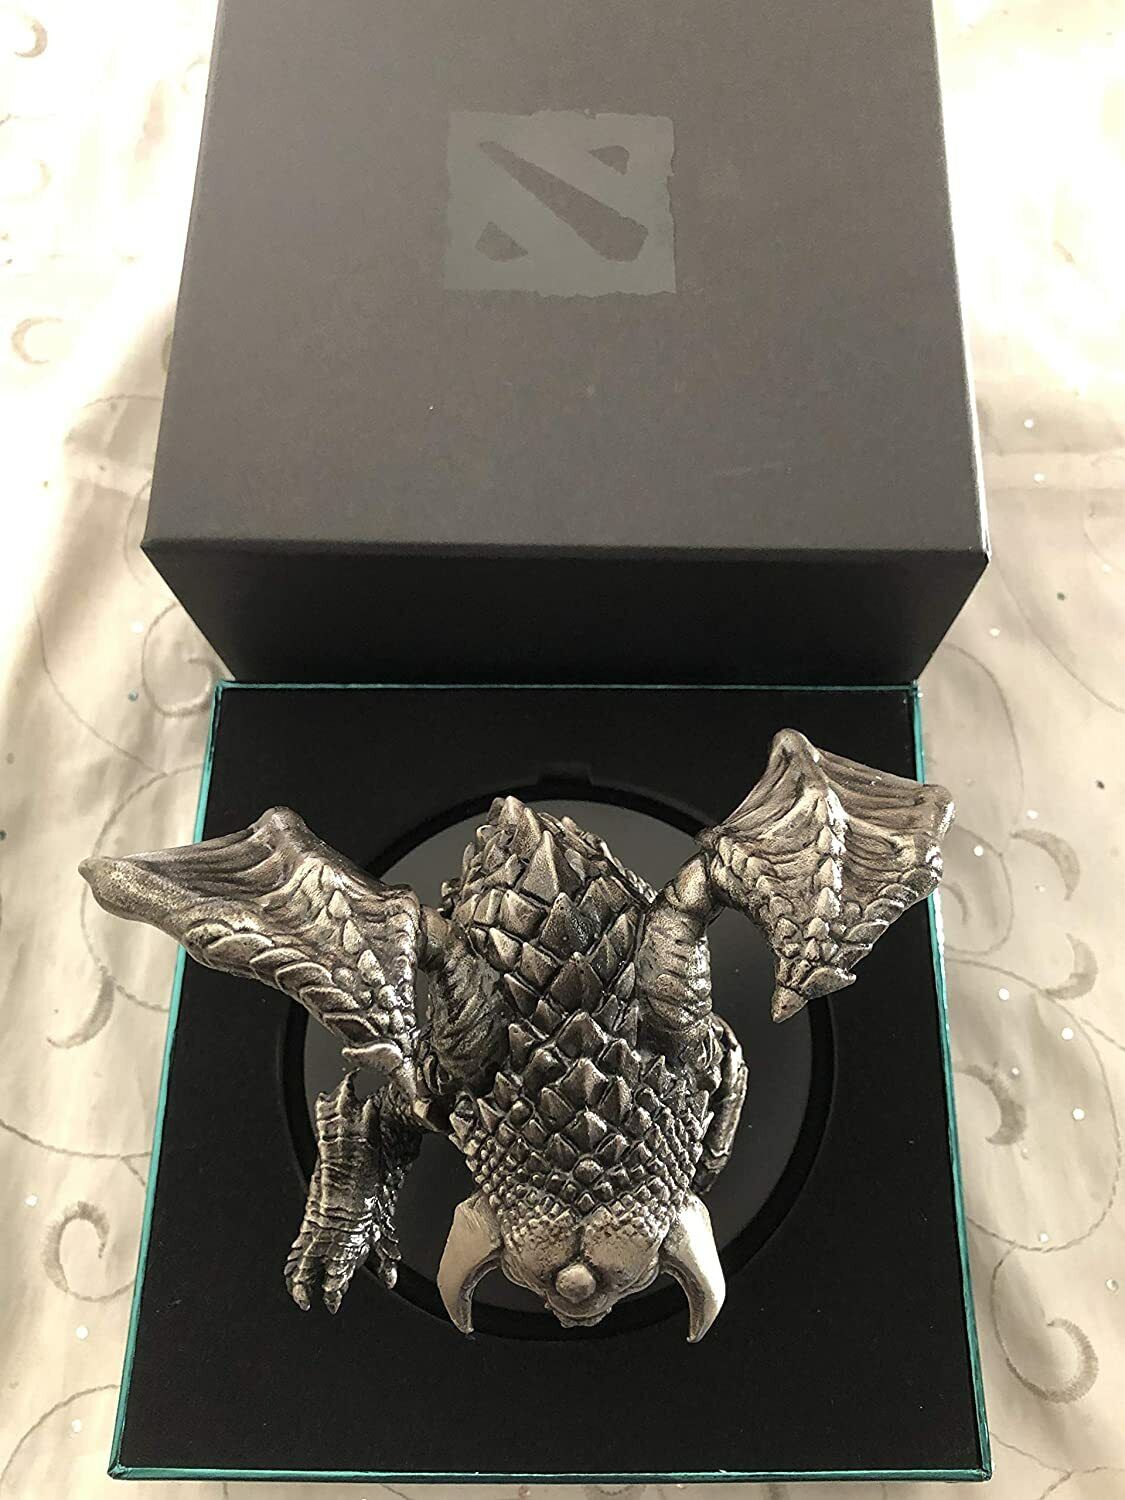 2019 Valve Corportion Collectors Baby Roshan Dota 2 Statue Figurine  Collection